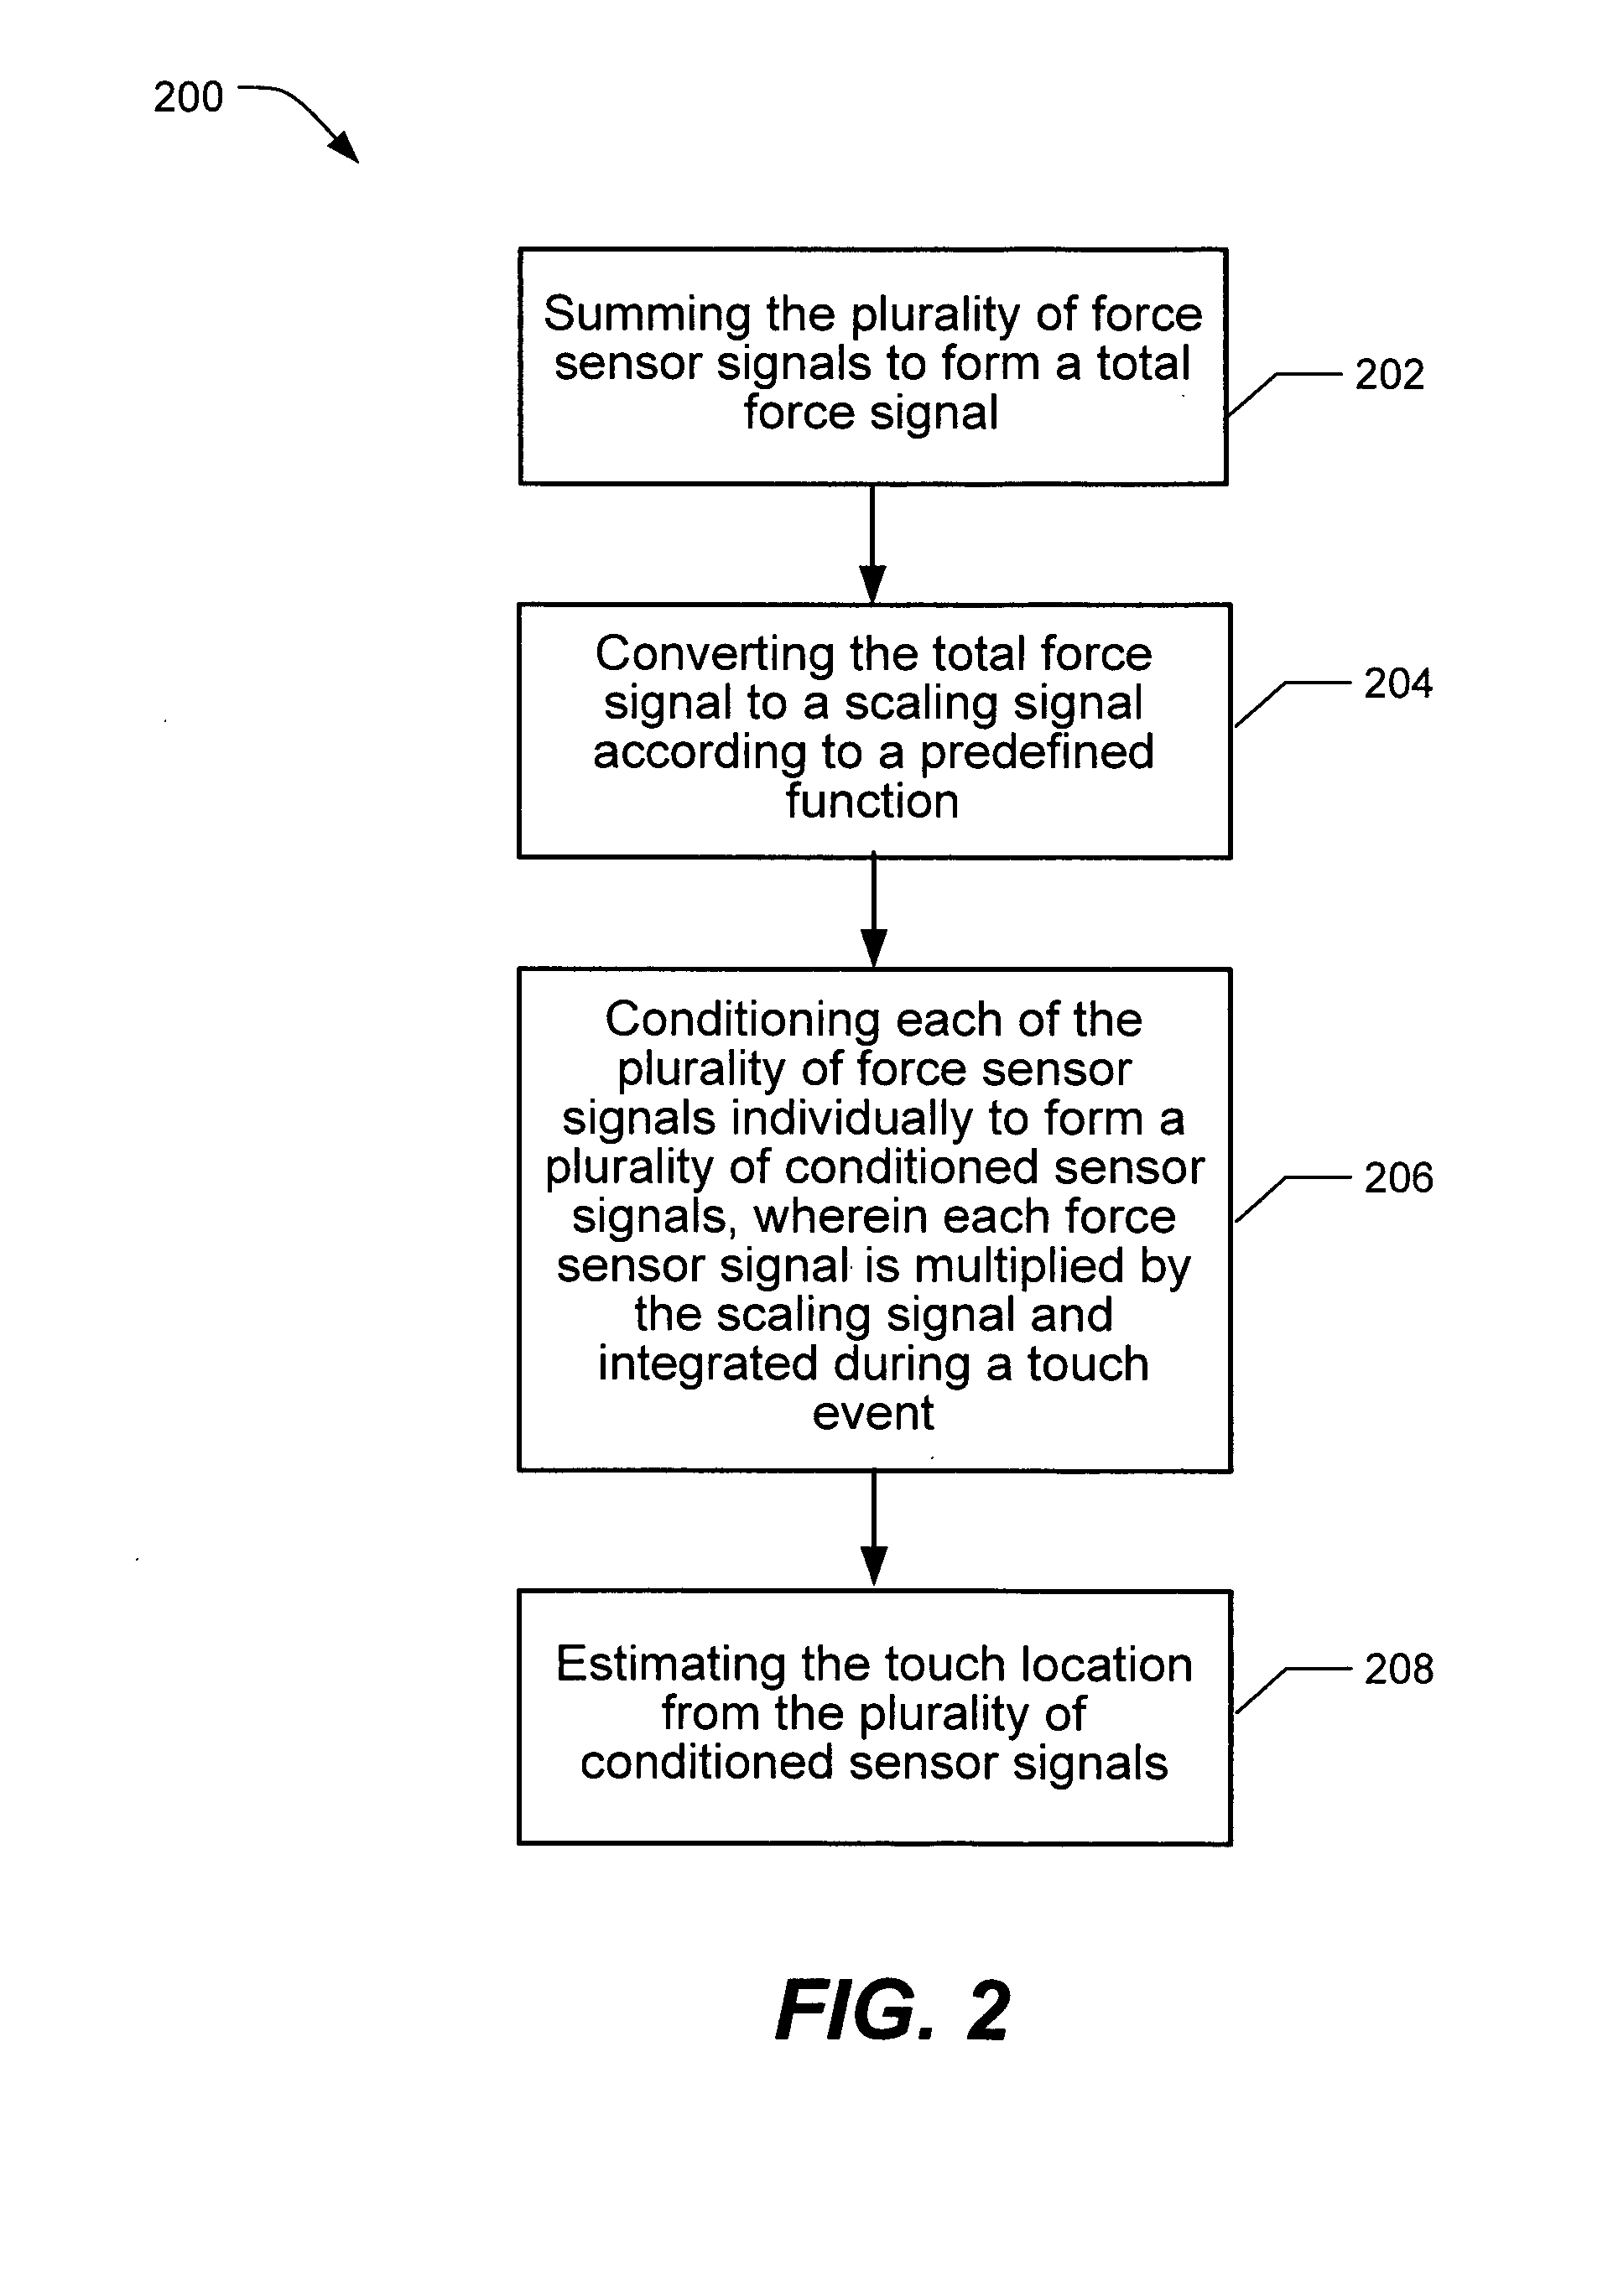 Sensor signal conditioning in a force-based touch device